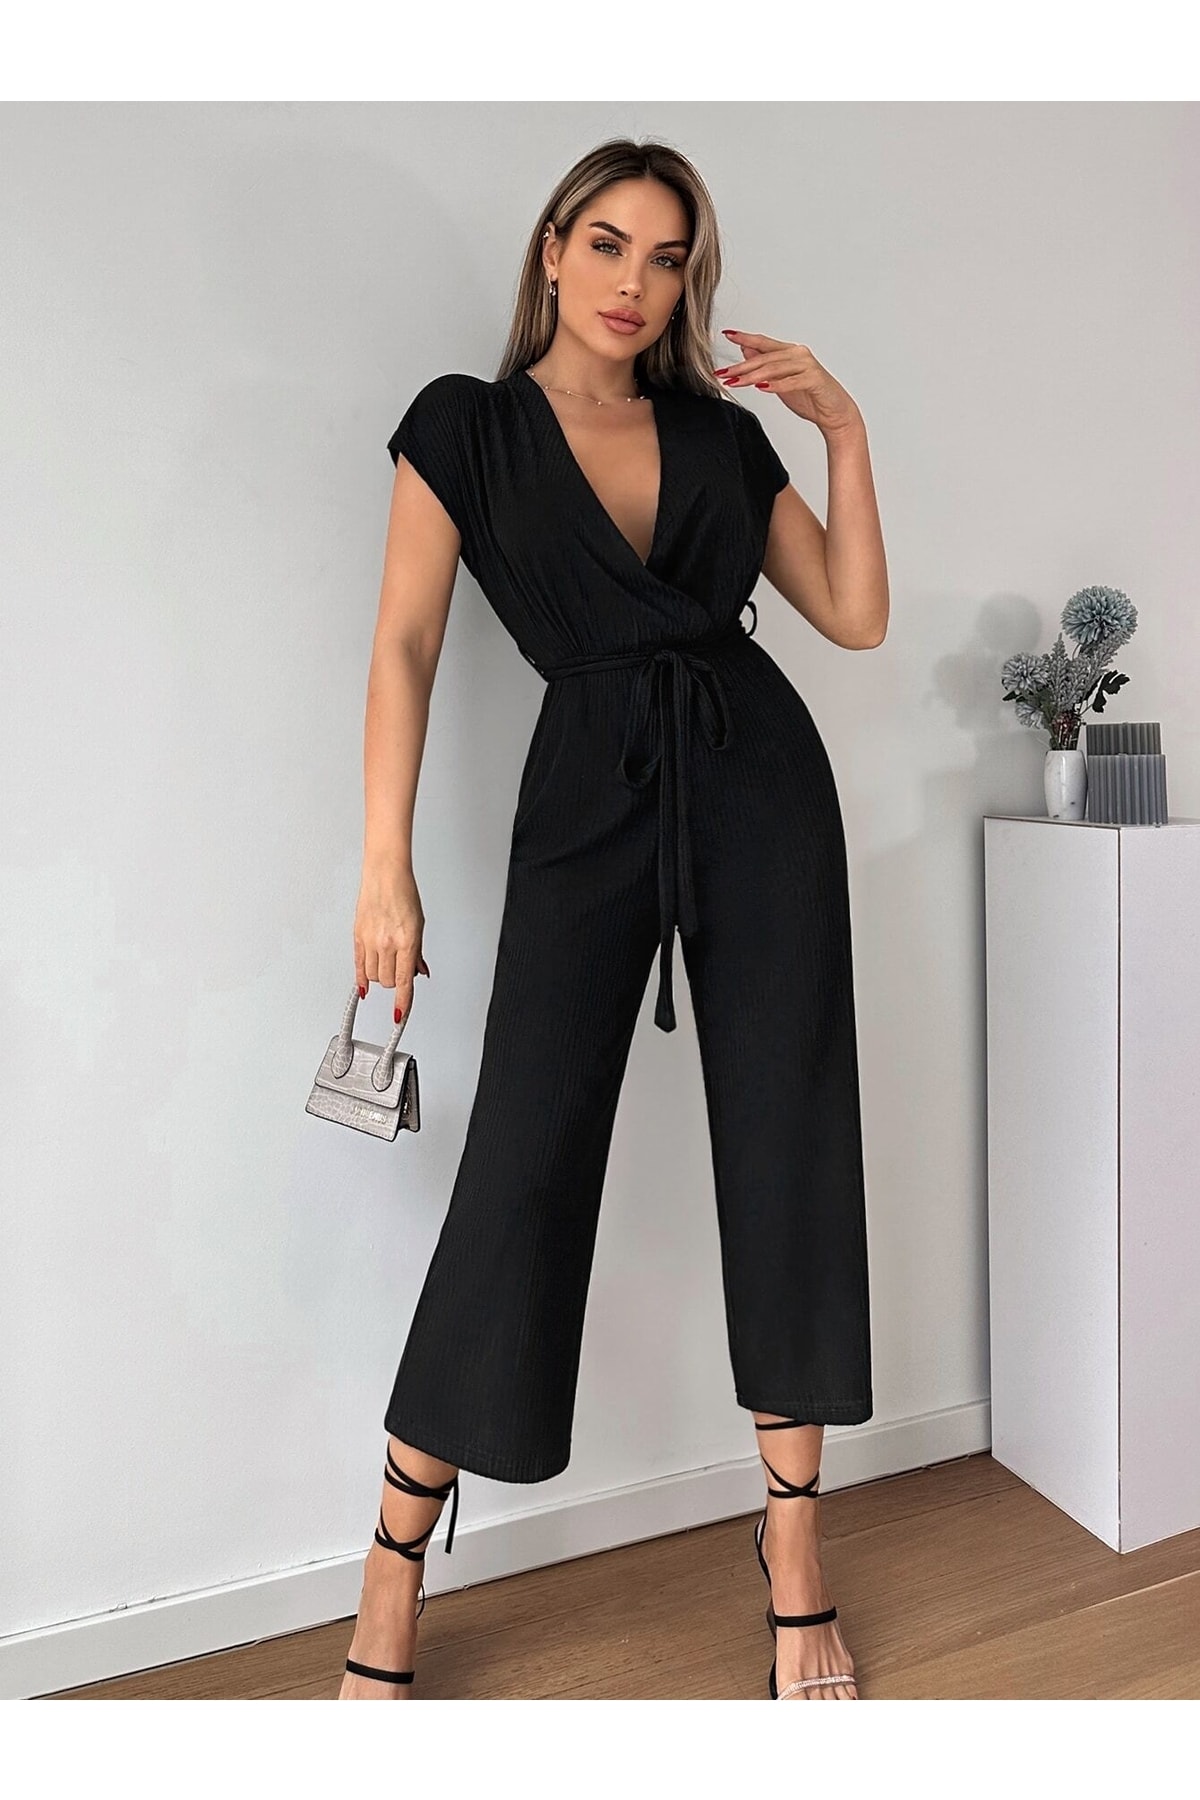 Levně armonika Women's Black Double Breasted Overalls With Belted Waist